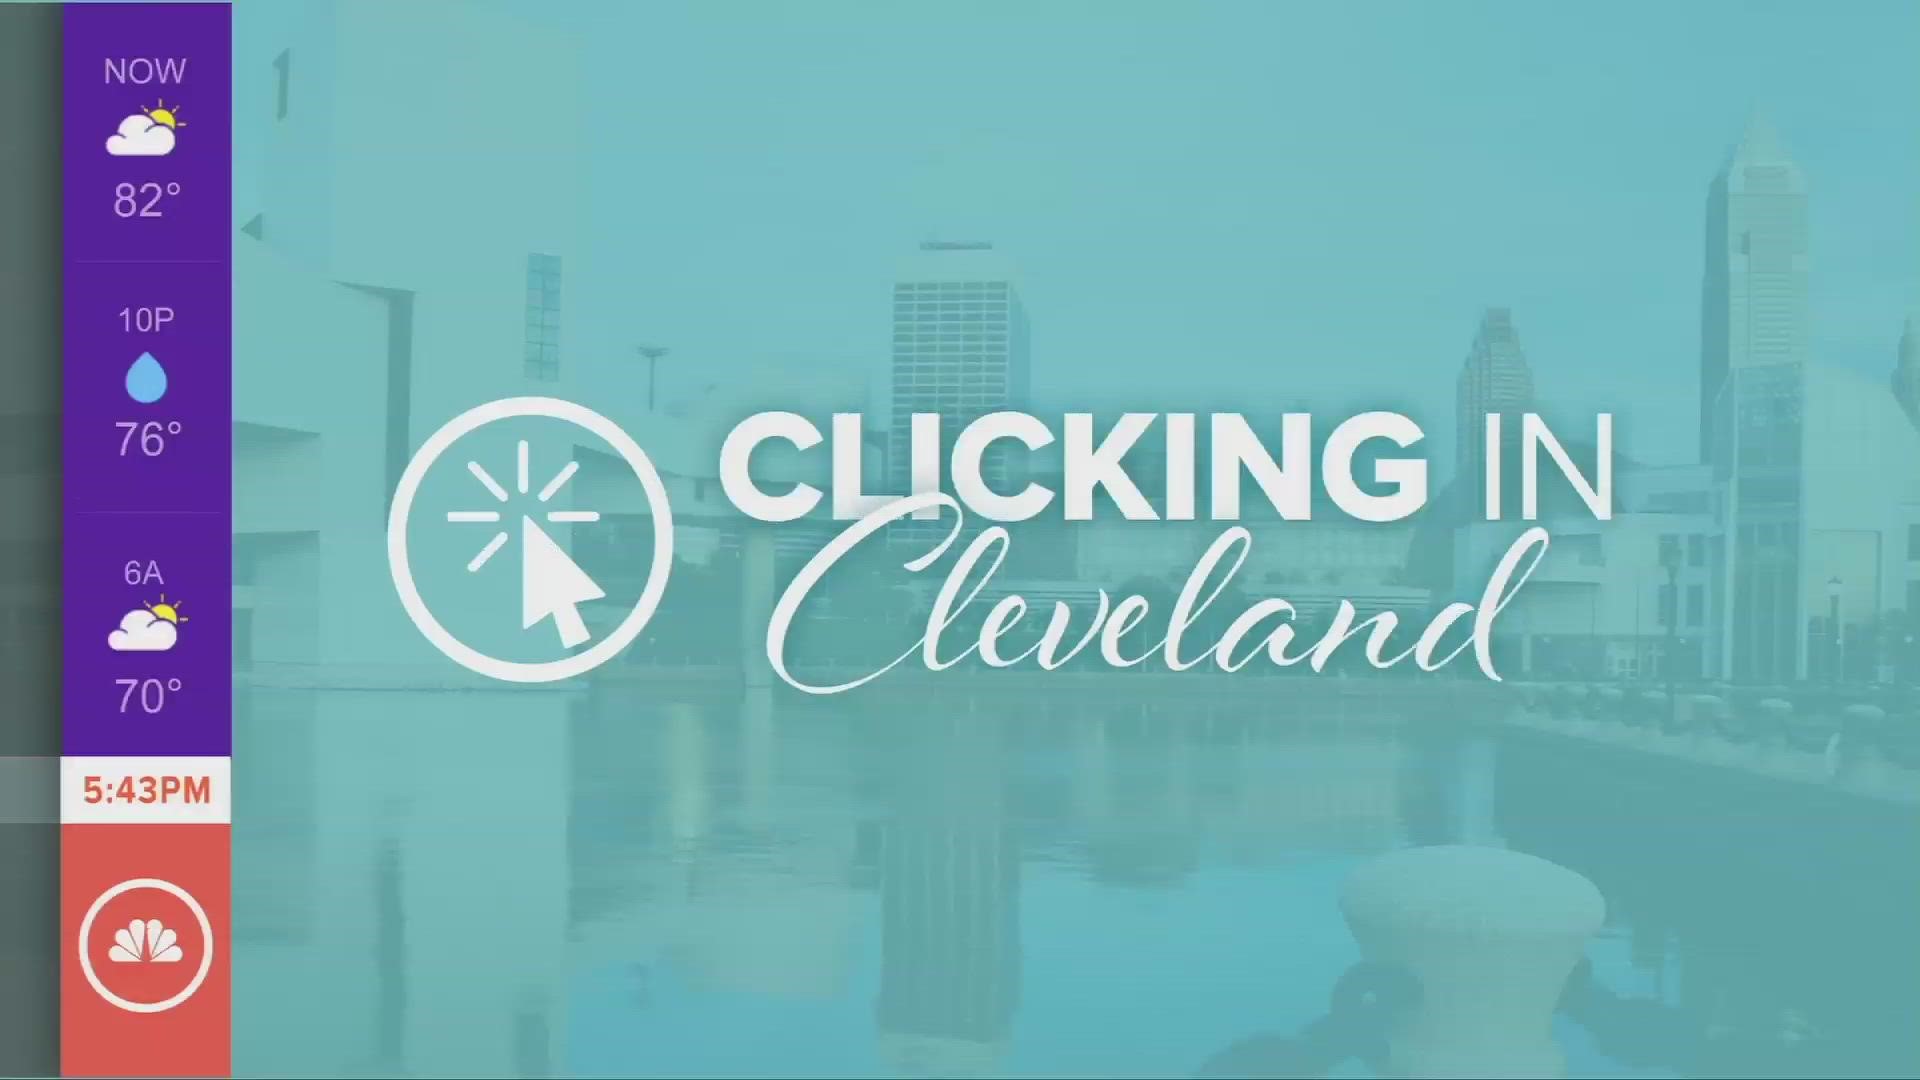 Stephanie Haney has the latest in Clicking in Cleveland.